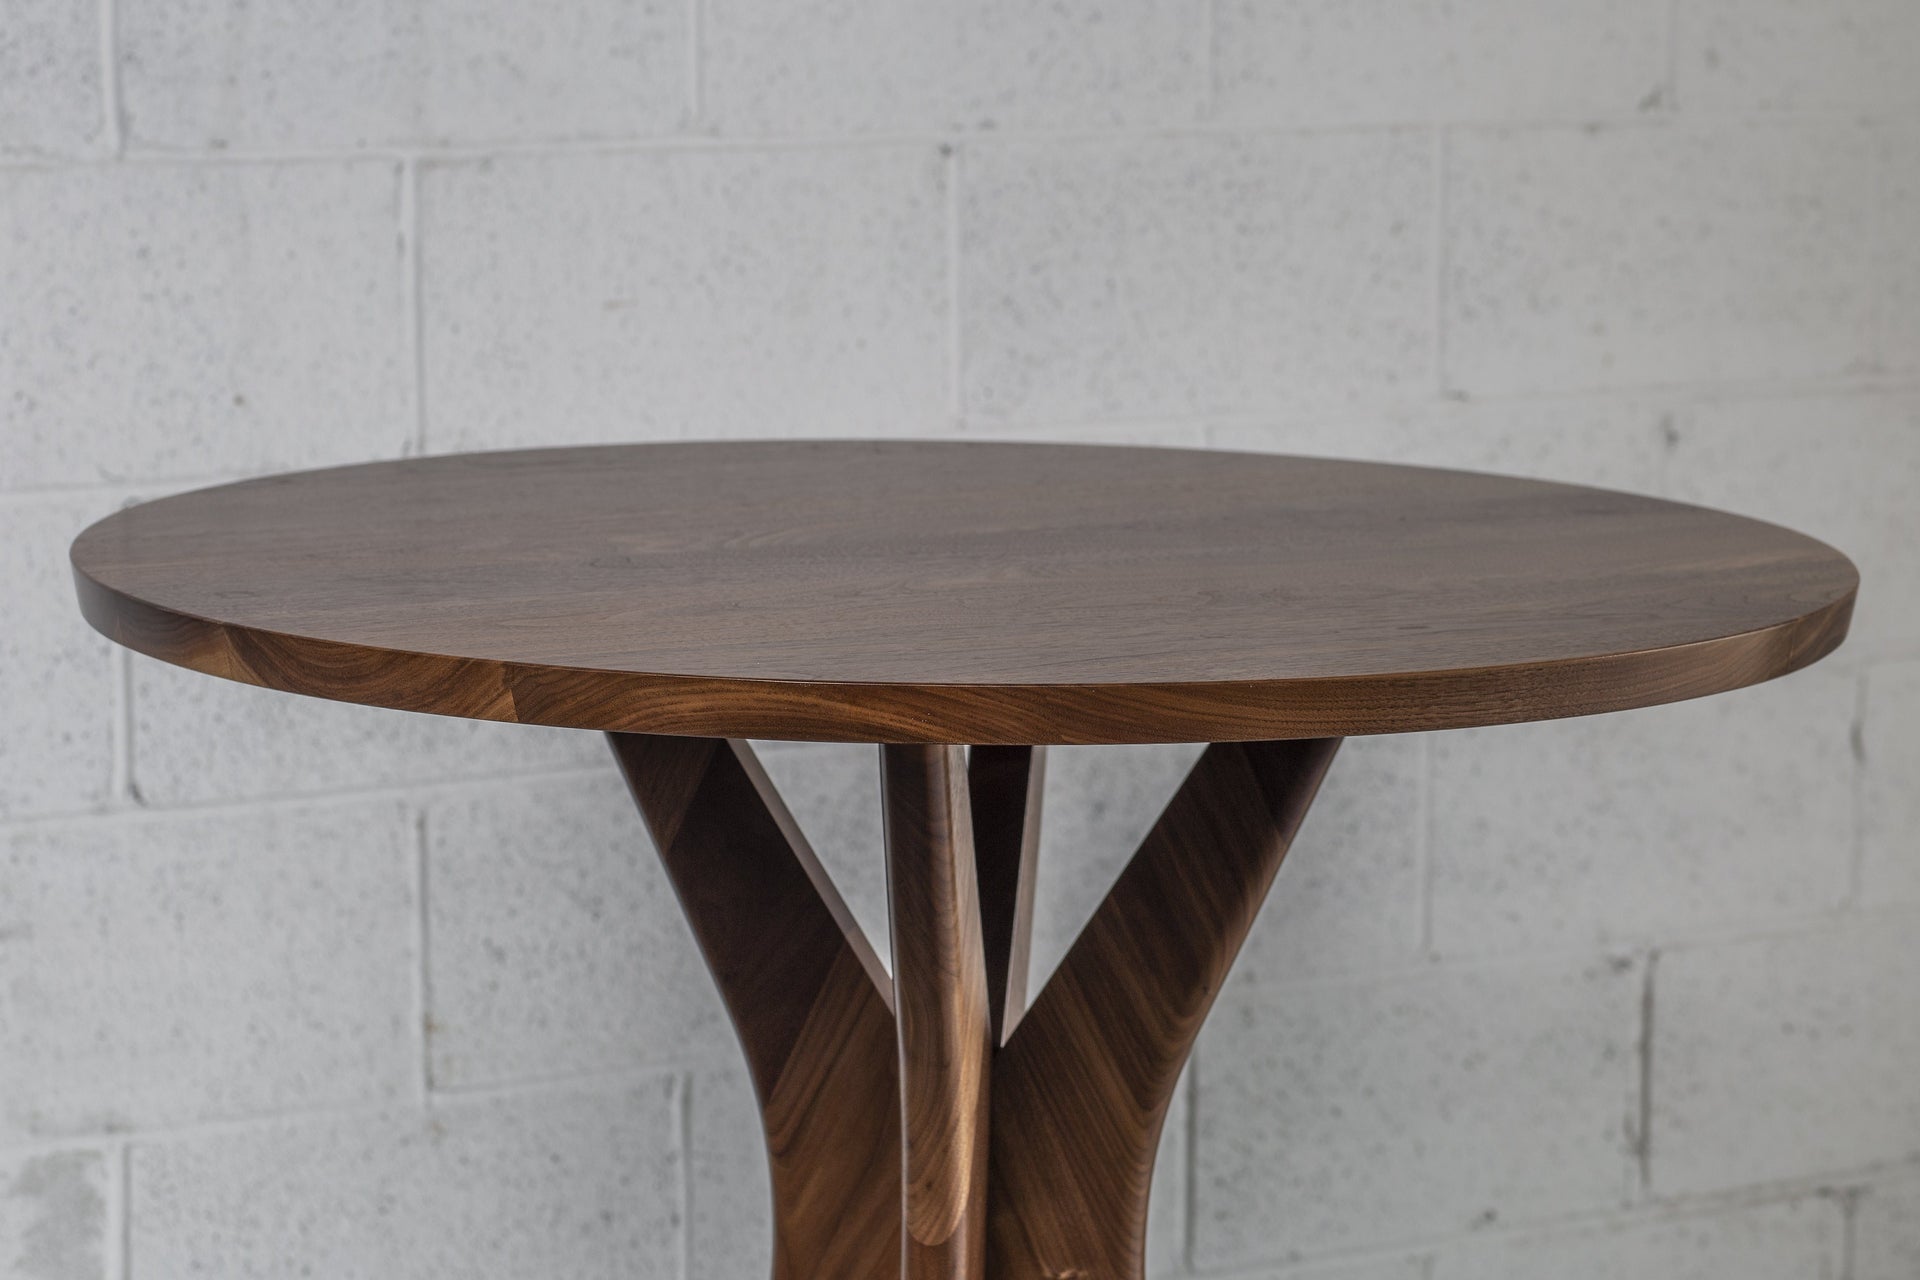 Solid wood table made in Columbus, Ohio